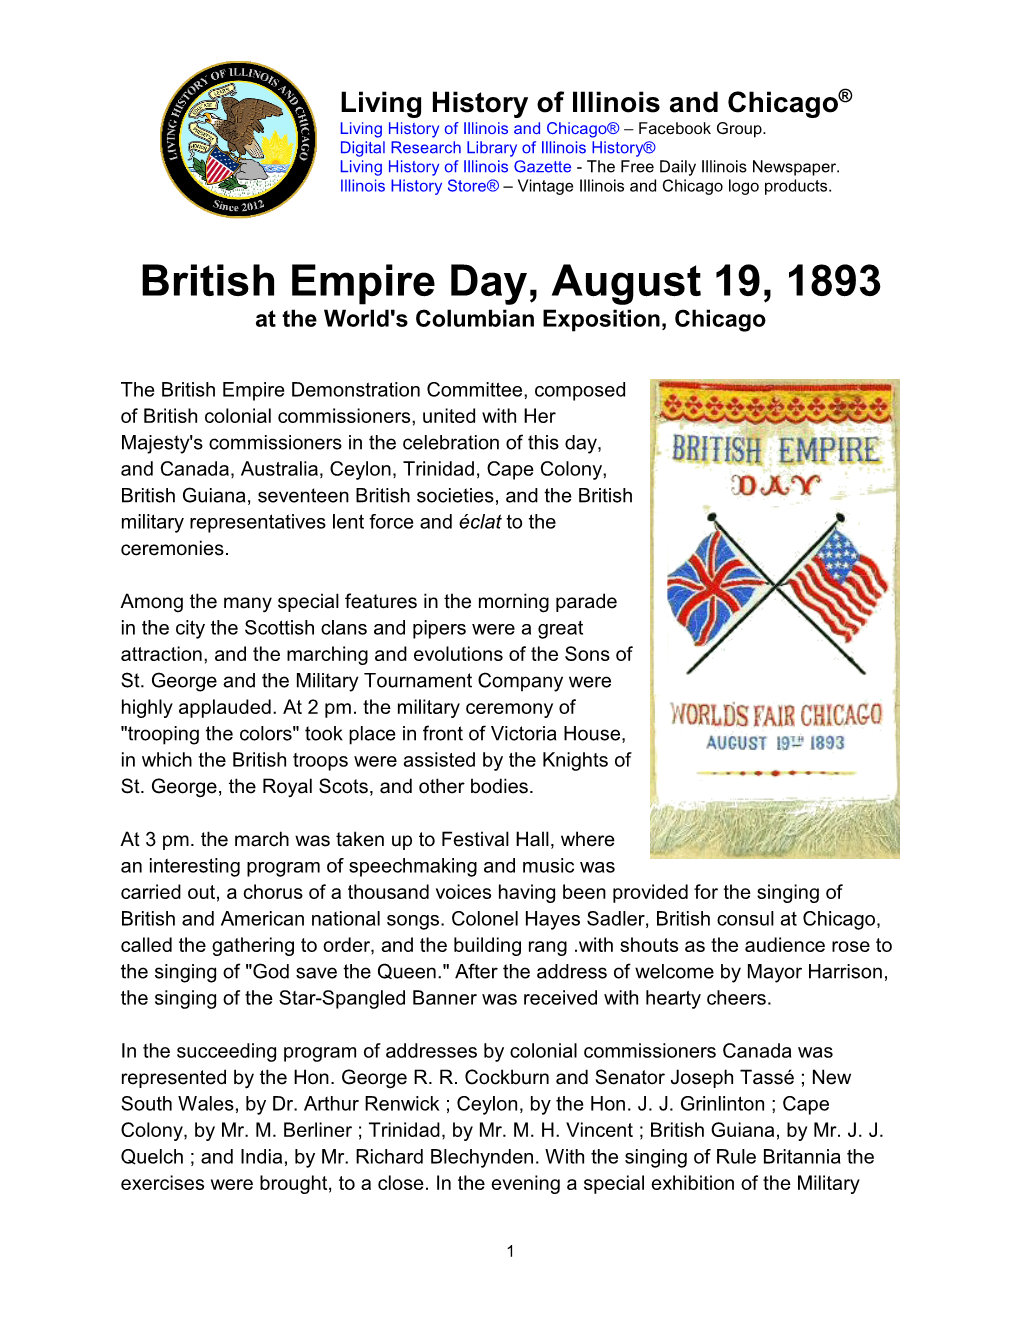 British Empire Day, August 19, 1893 at the World's Columbian Exposition, Chicago